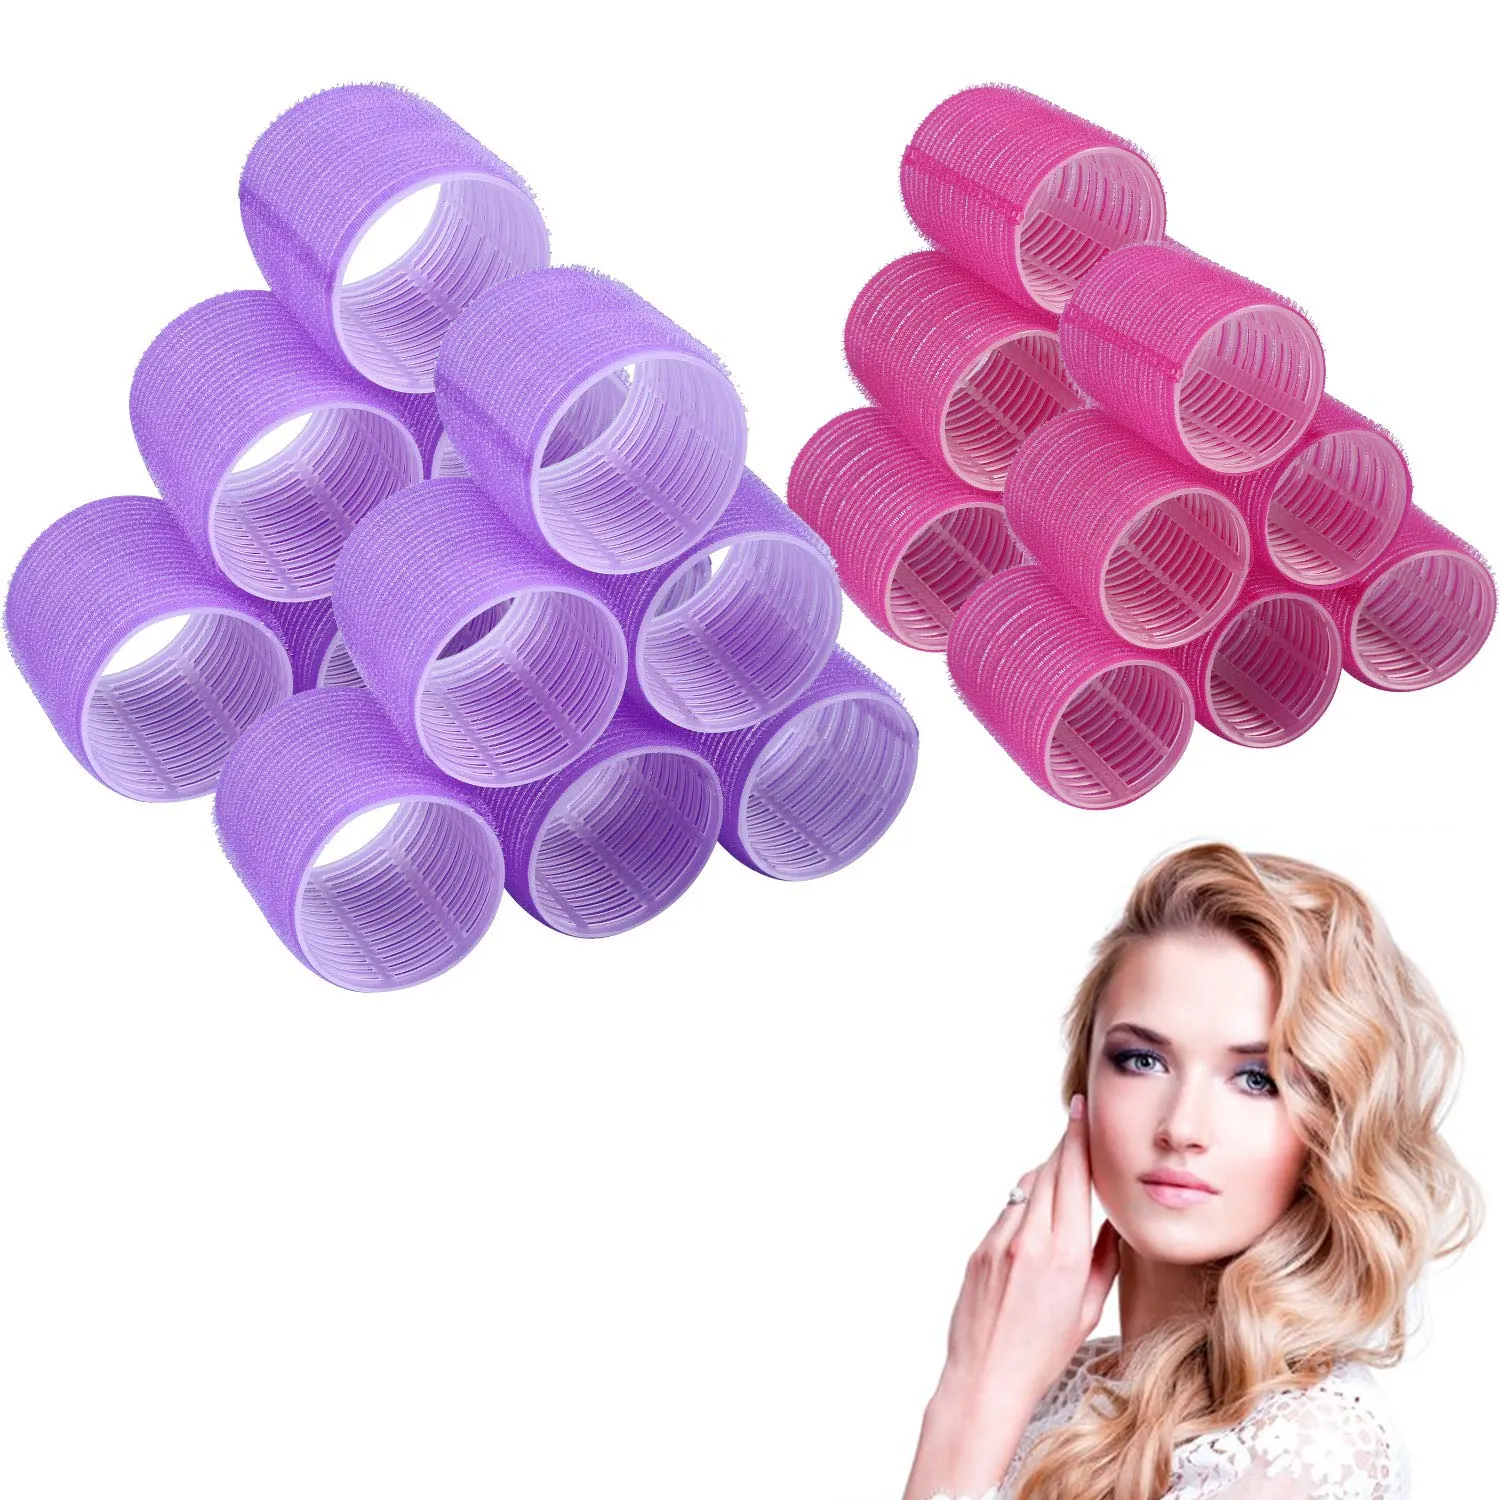 Large perm rods Self june Grip Hair Roller Sets Salon Hairdressing Curlers Random Color No Heat Hair Rollers with Duckbill Clips